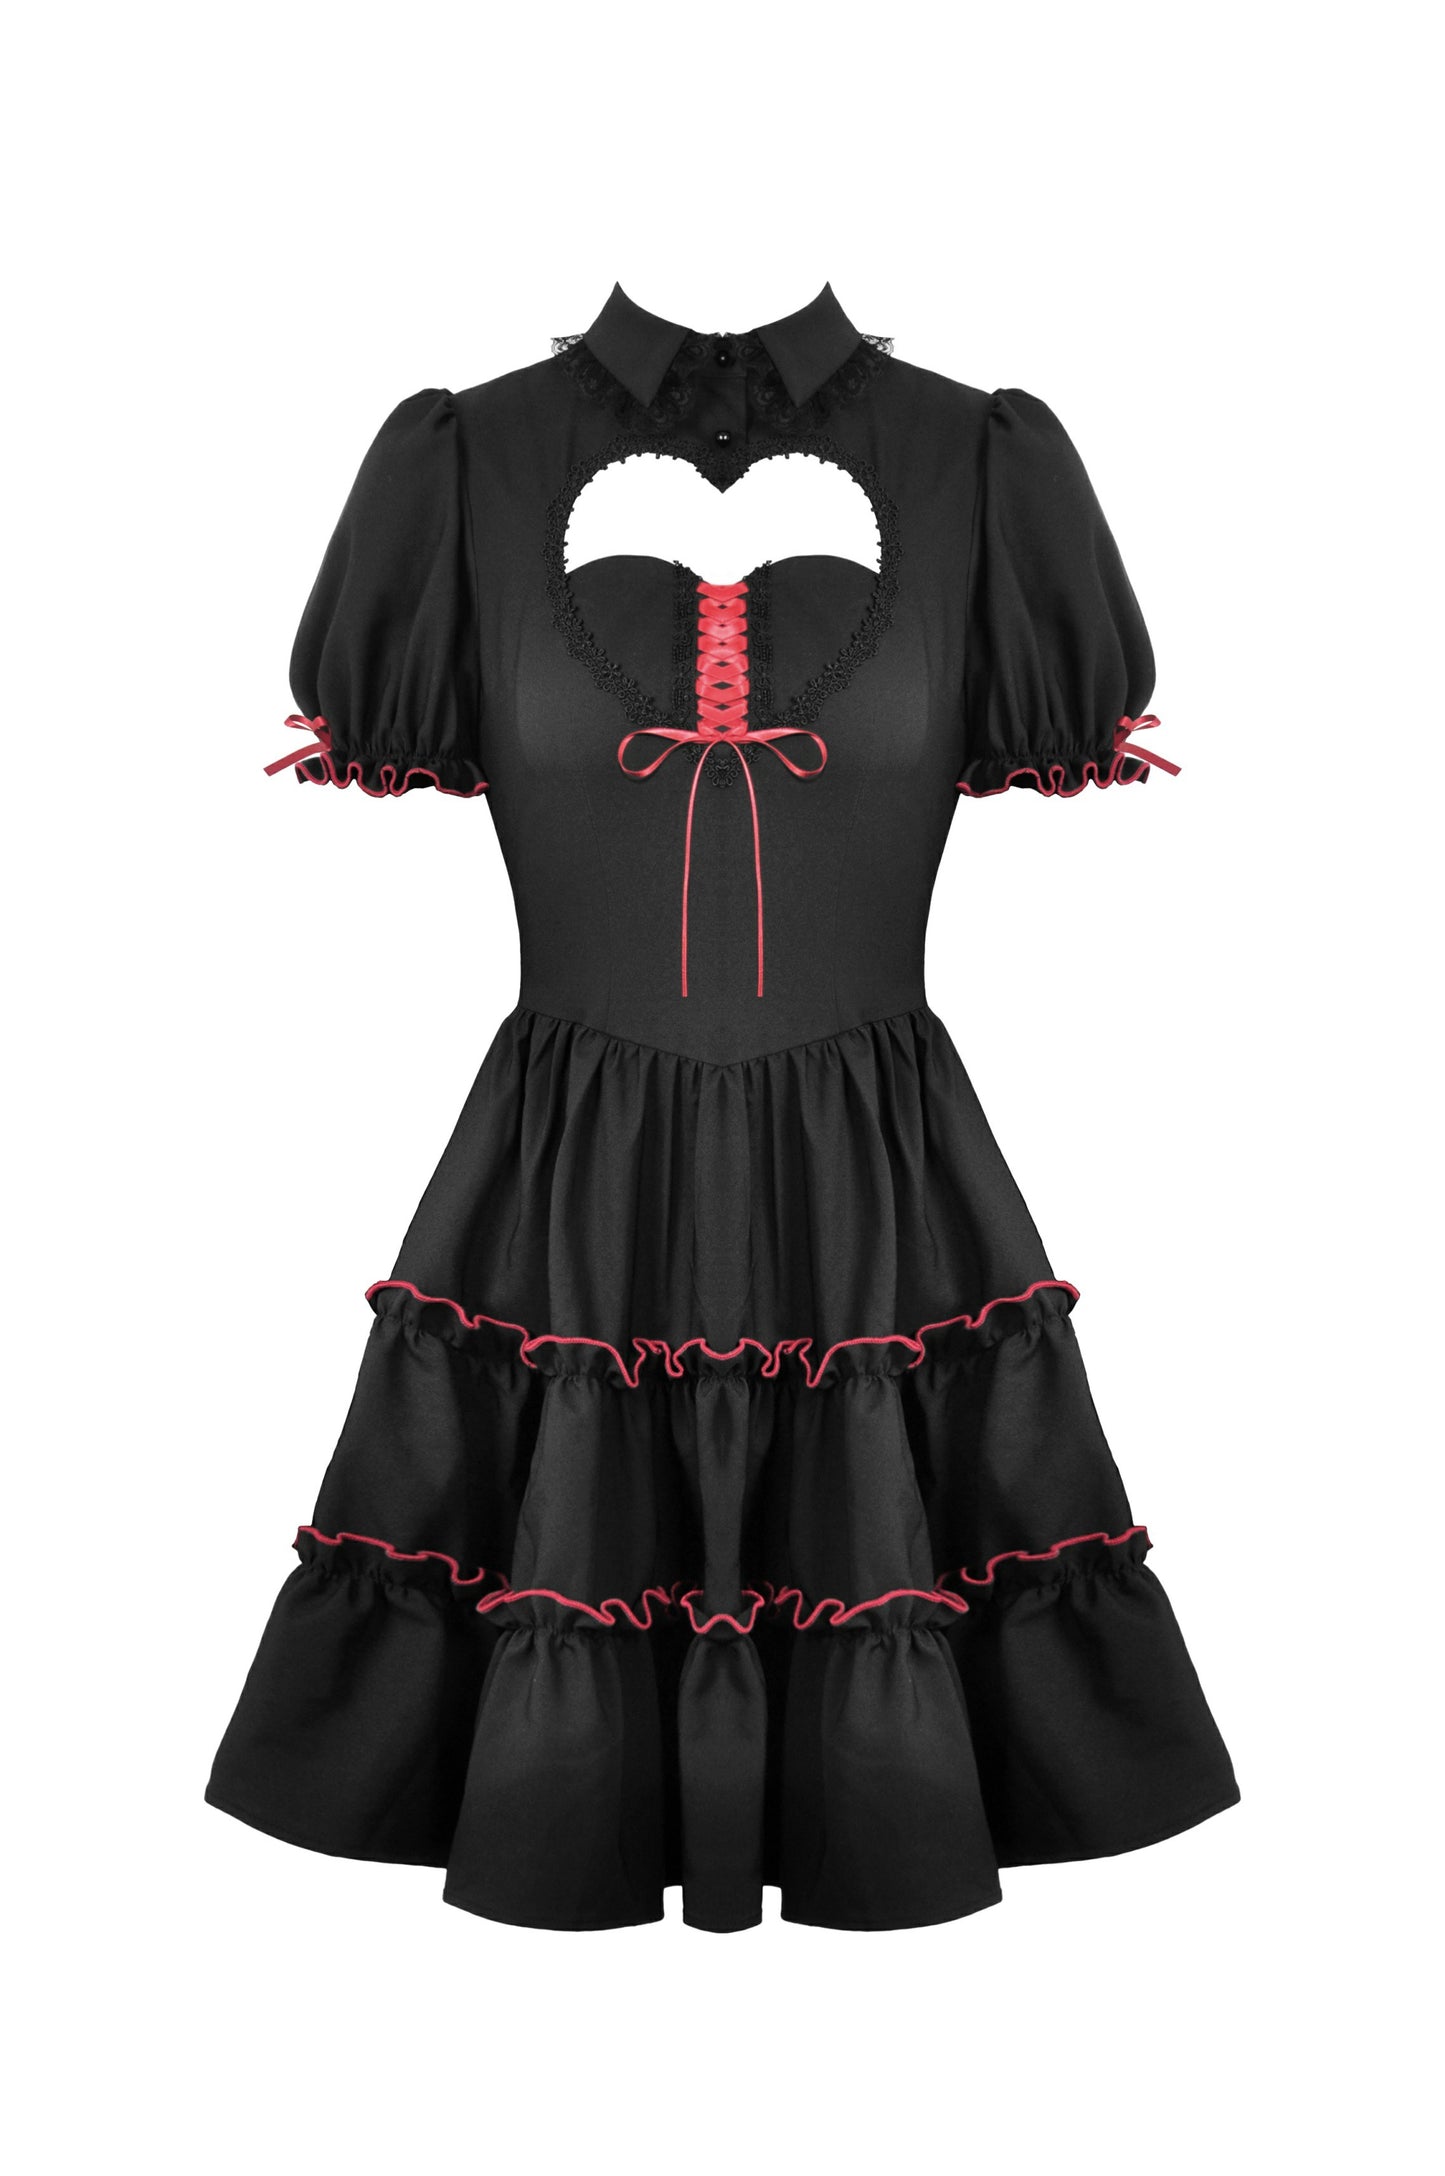 Haunted Doll House Frilly Gothic Dress by Dark In Love